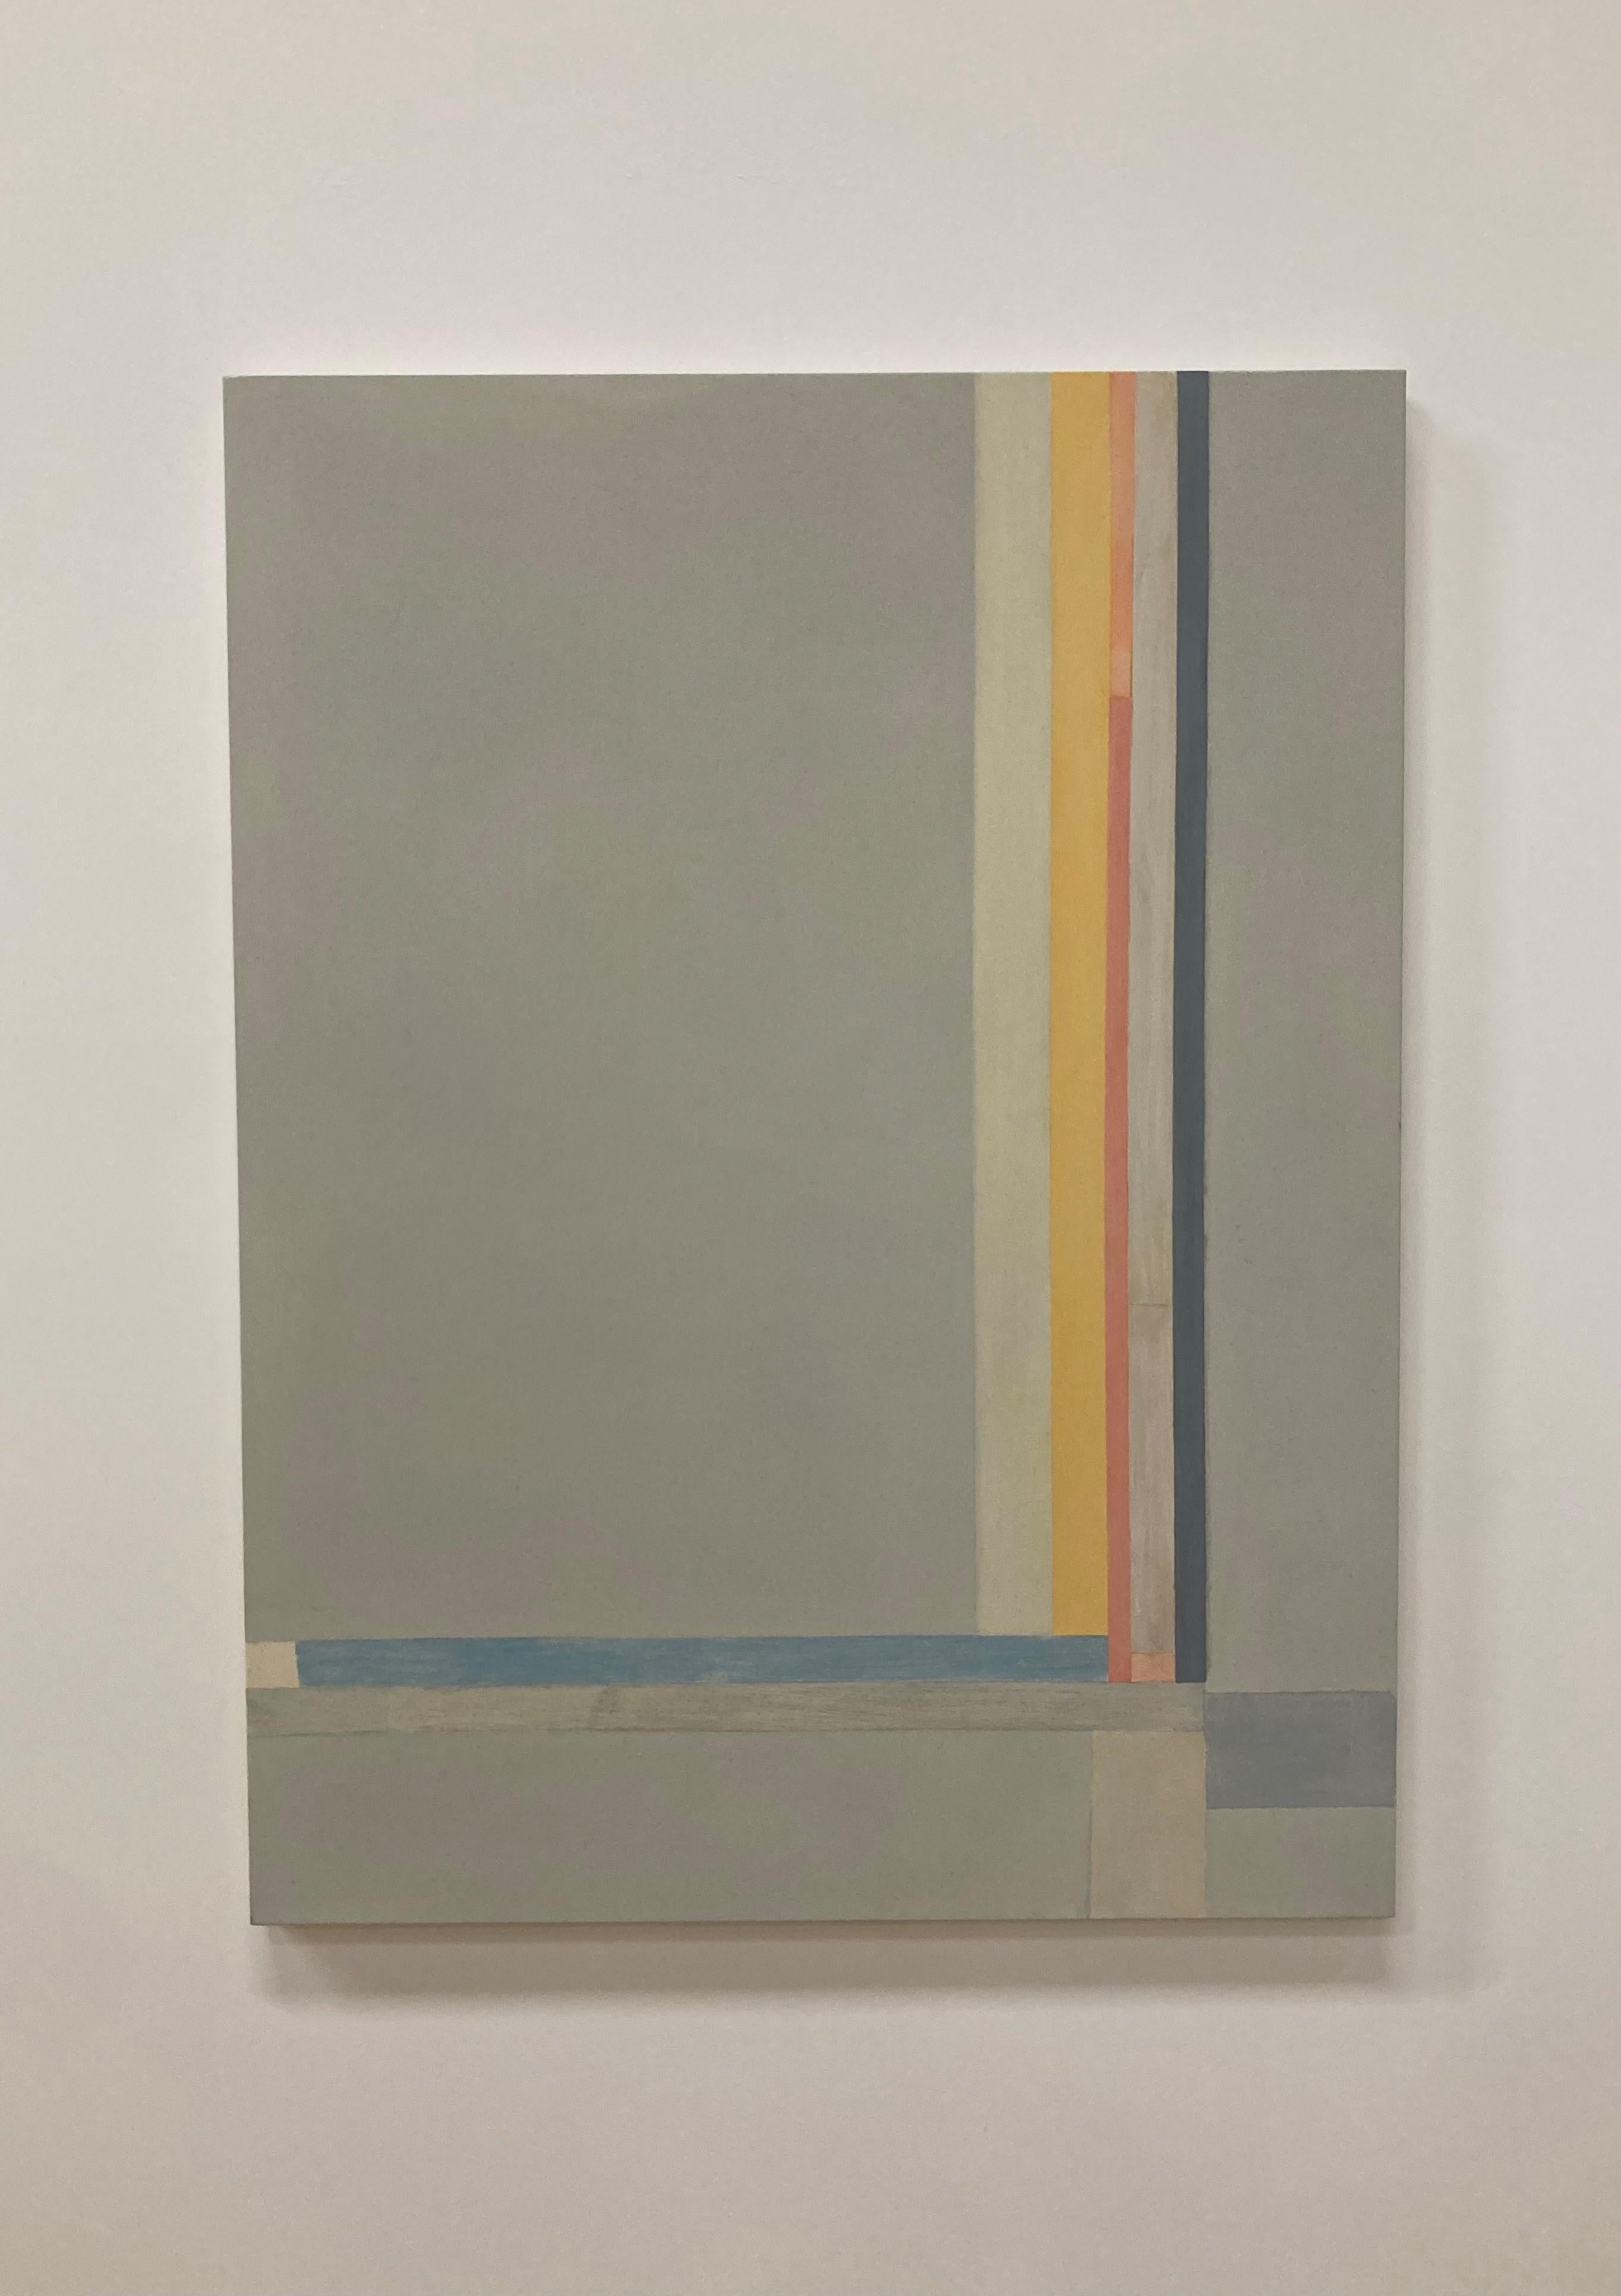 In this painting by Elizabeth Gourlay, clean, precise, hand-painted stripes and blocks of color in yellow, orange, light blue and dark gray are warm and vibrant against the soft beige background. Signed, dated and titled on verso.

Elizabeth